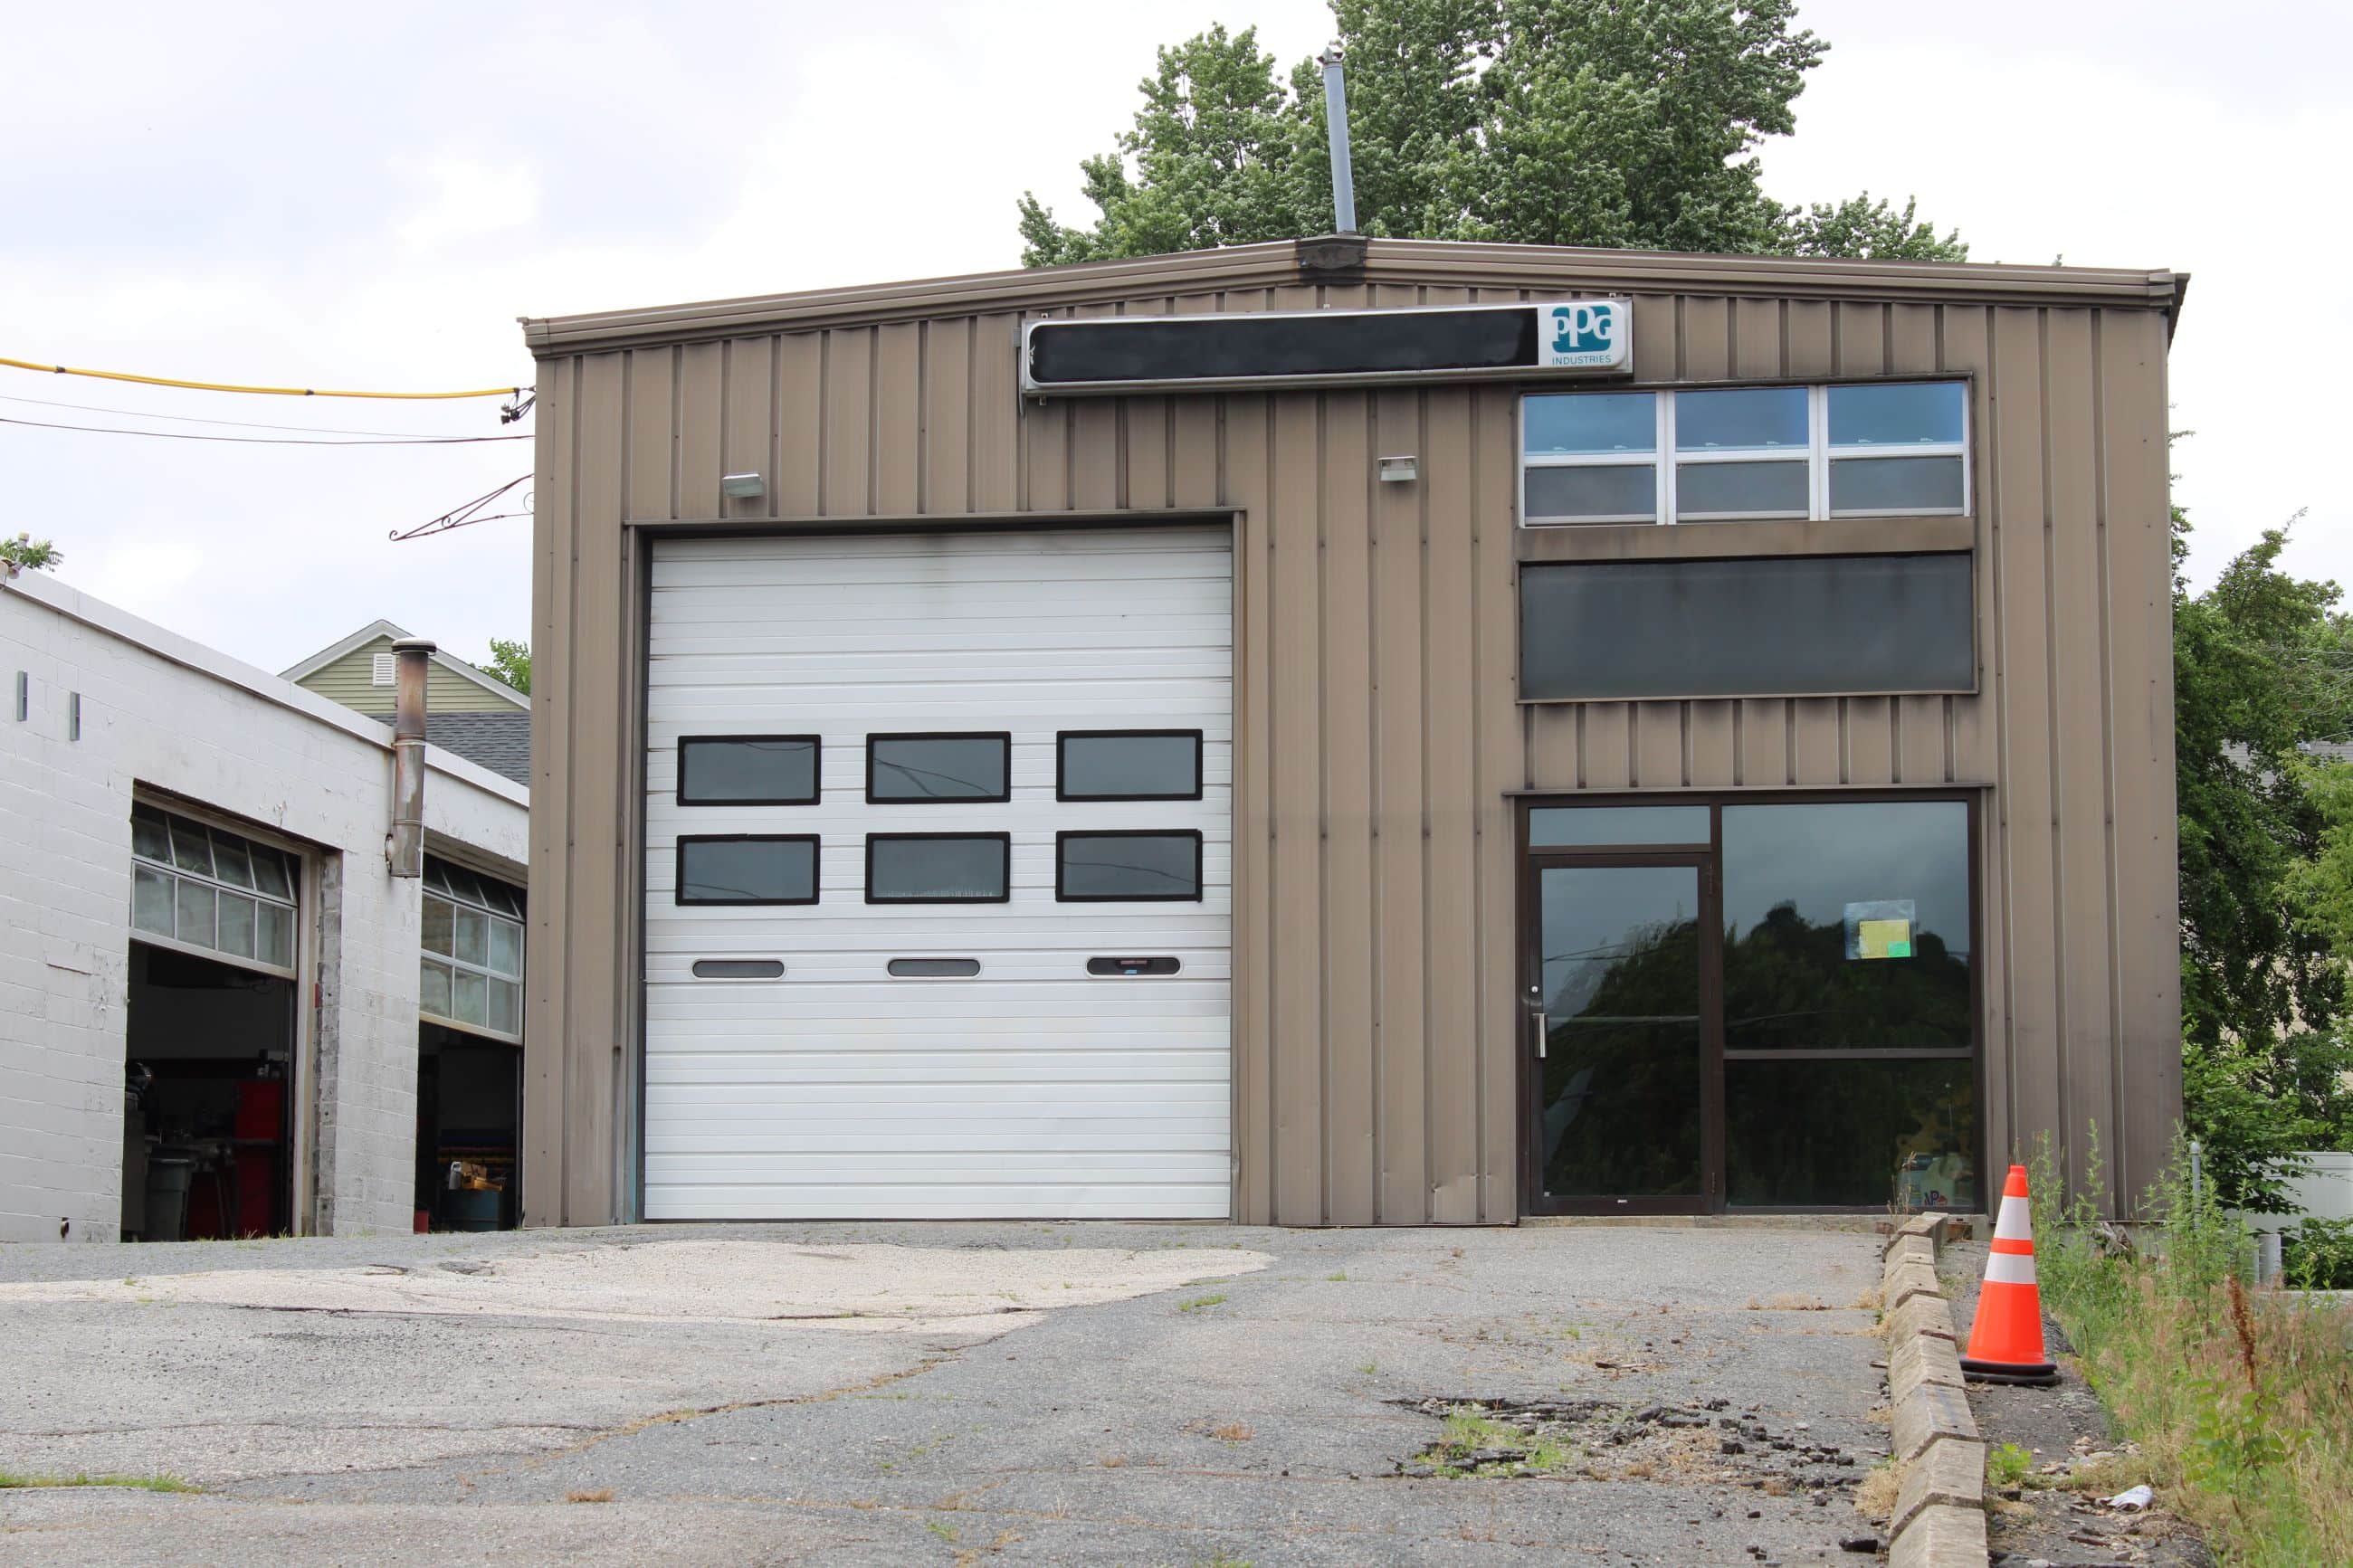 Auto shop draws support for special permit request